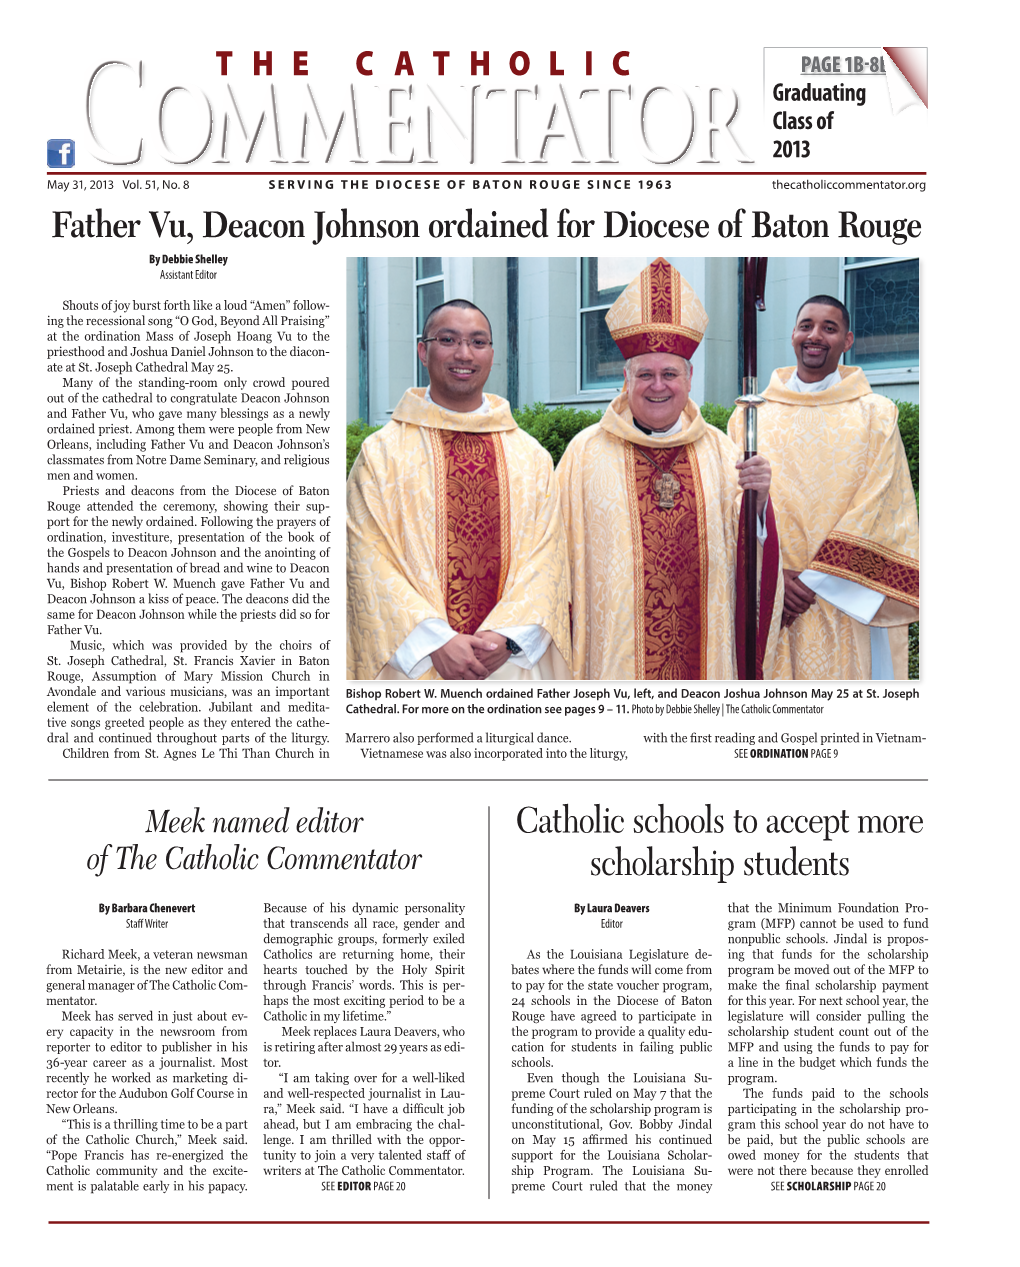 Father Vu, Deacon Johnson Ordained for Diocese of Baton Rouge Catholic Schools to Accept More Scholarship Students